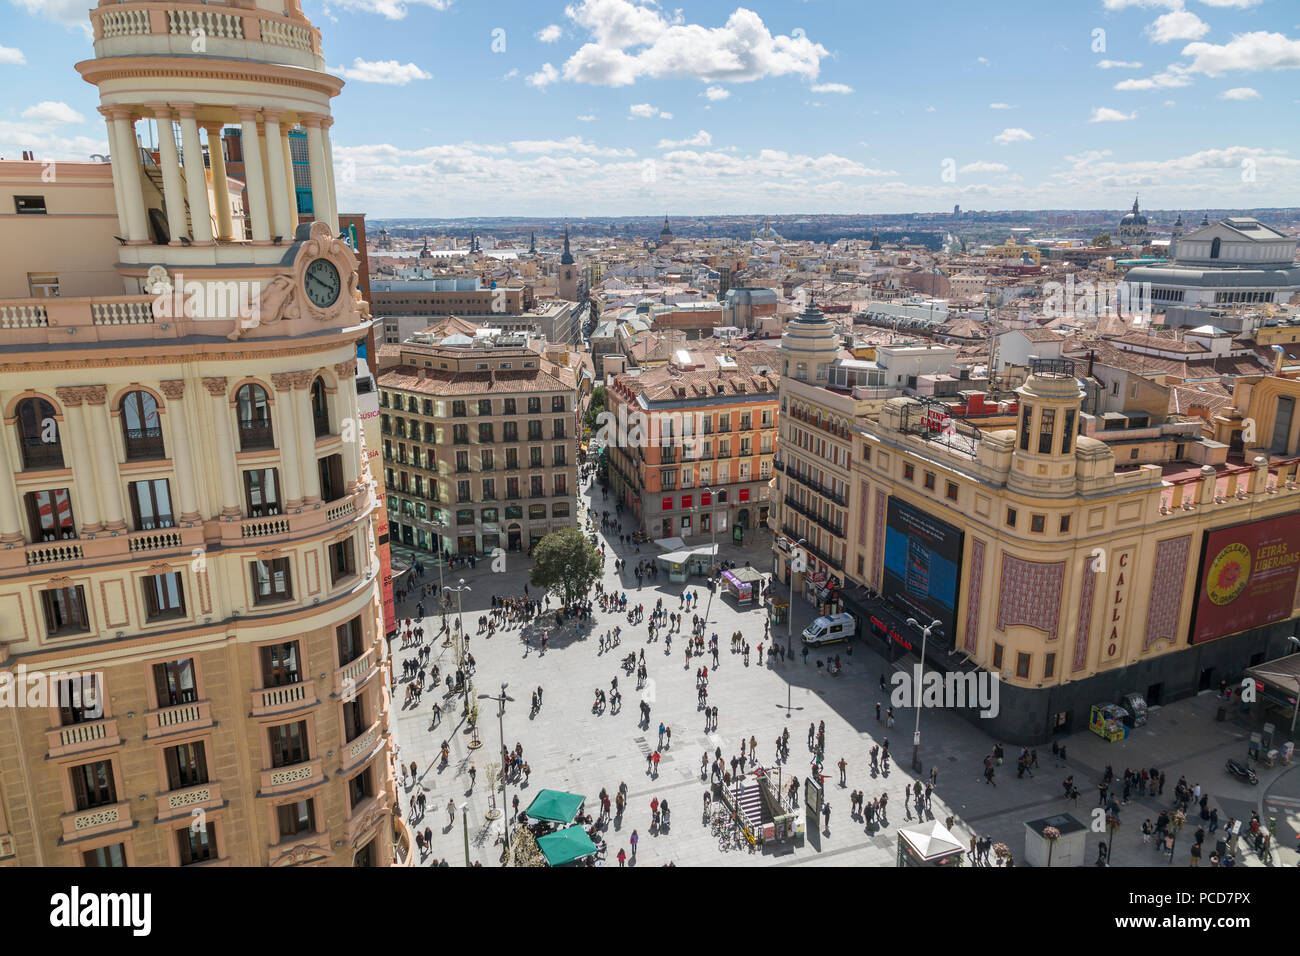 View of Plaza del Calao from elevated position, Madrid, Spain, Europe Stock Photo